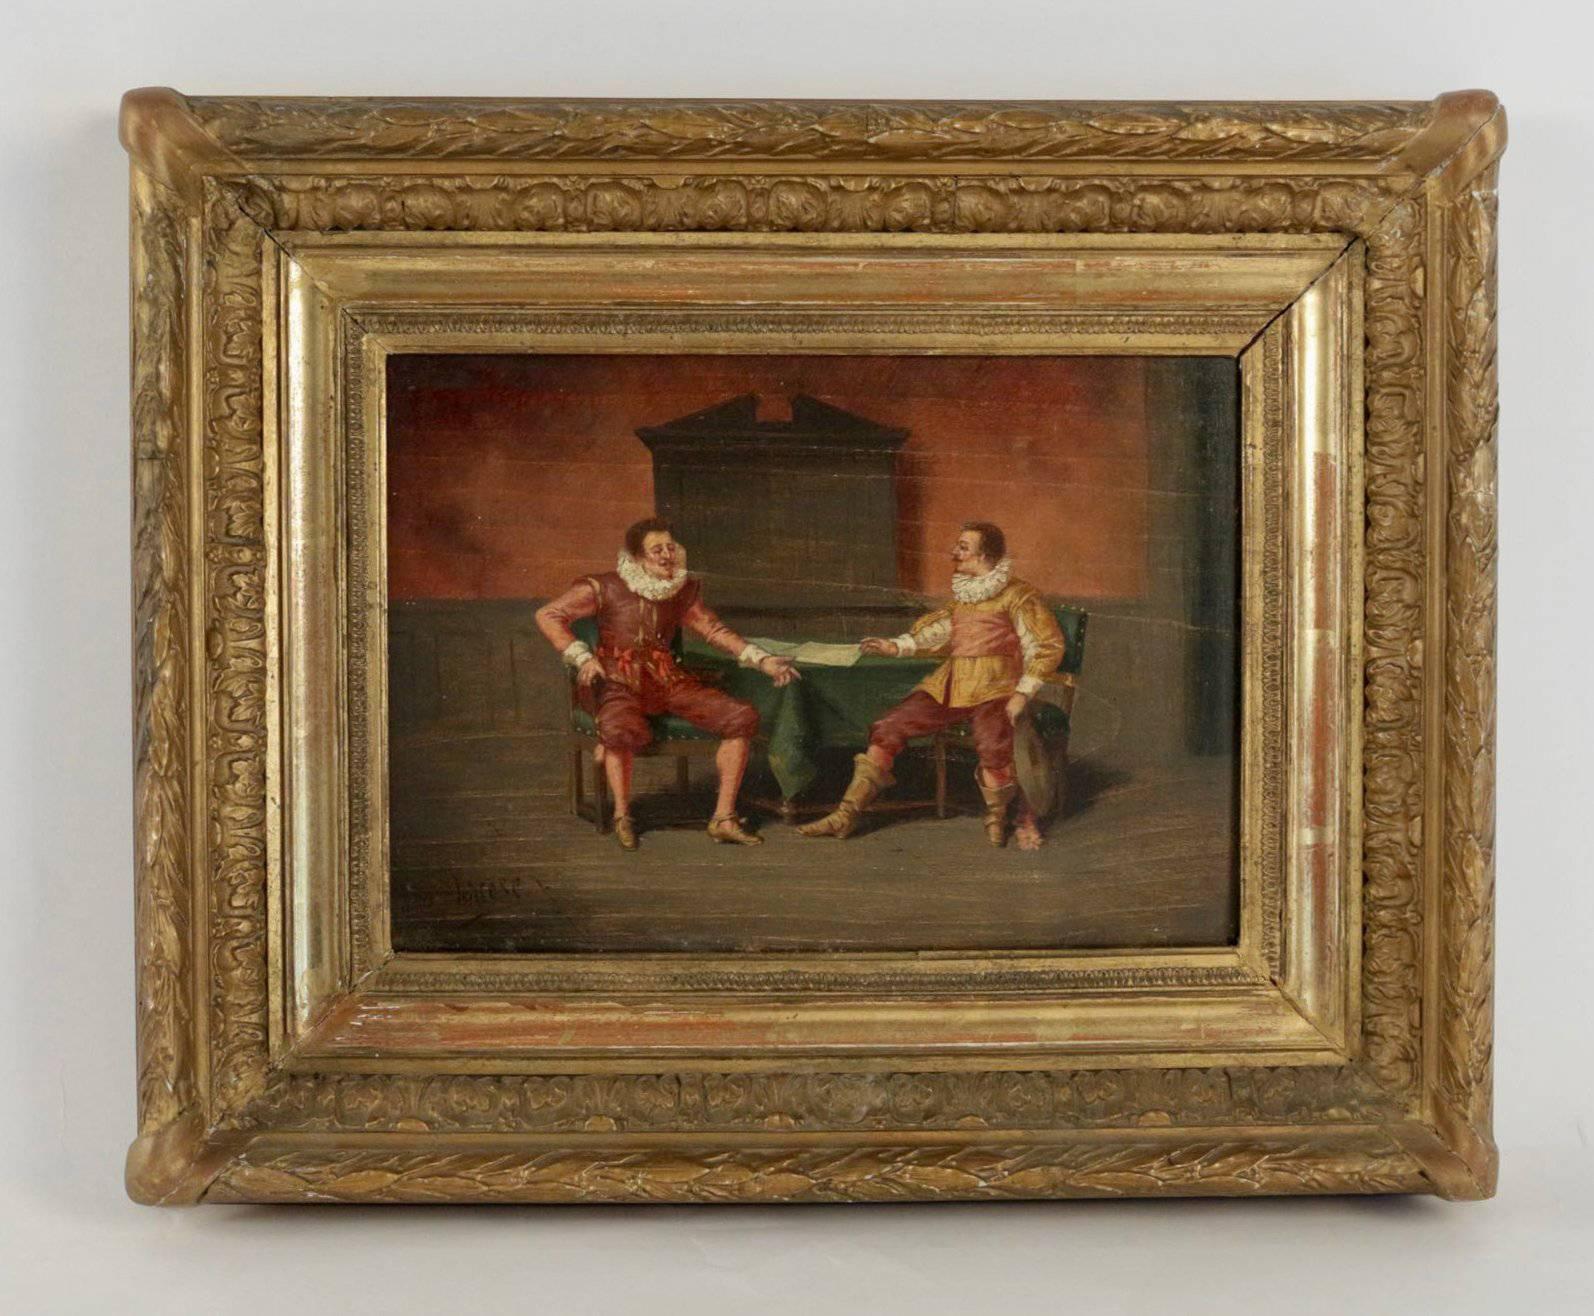 Charming painting, it depicts the conversation between 16th-century characters.
Canadian school, late 19th century, sign on the lower left by Ludger Larose, circa 1890.

Fine original condition.
Original panel.
Original giltwood